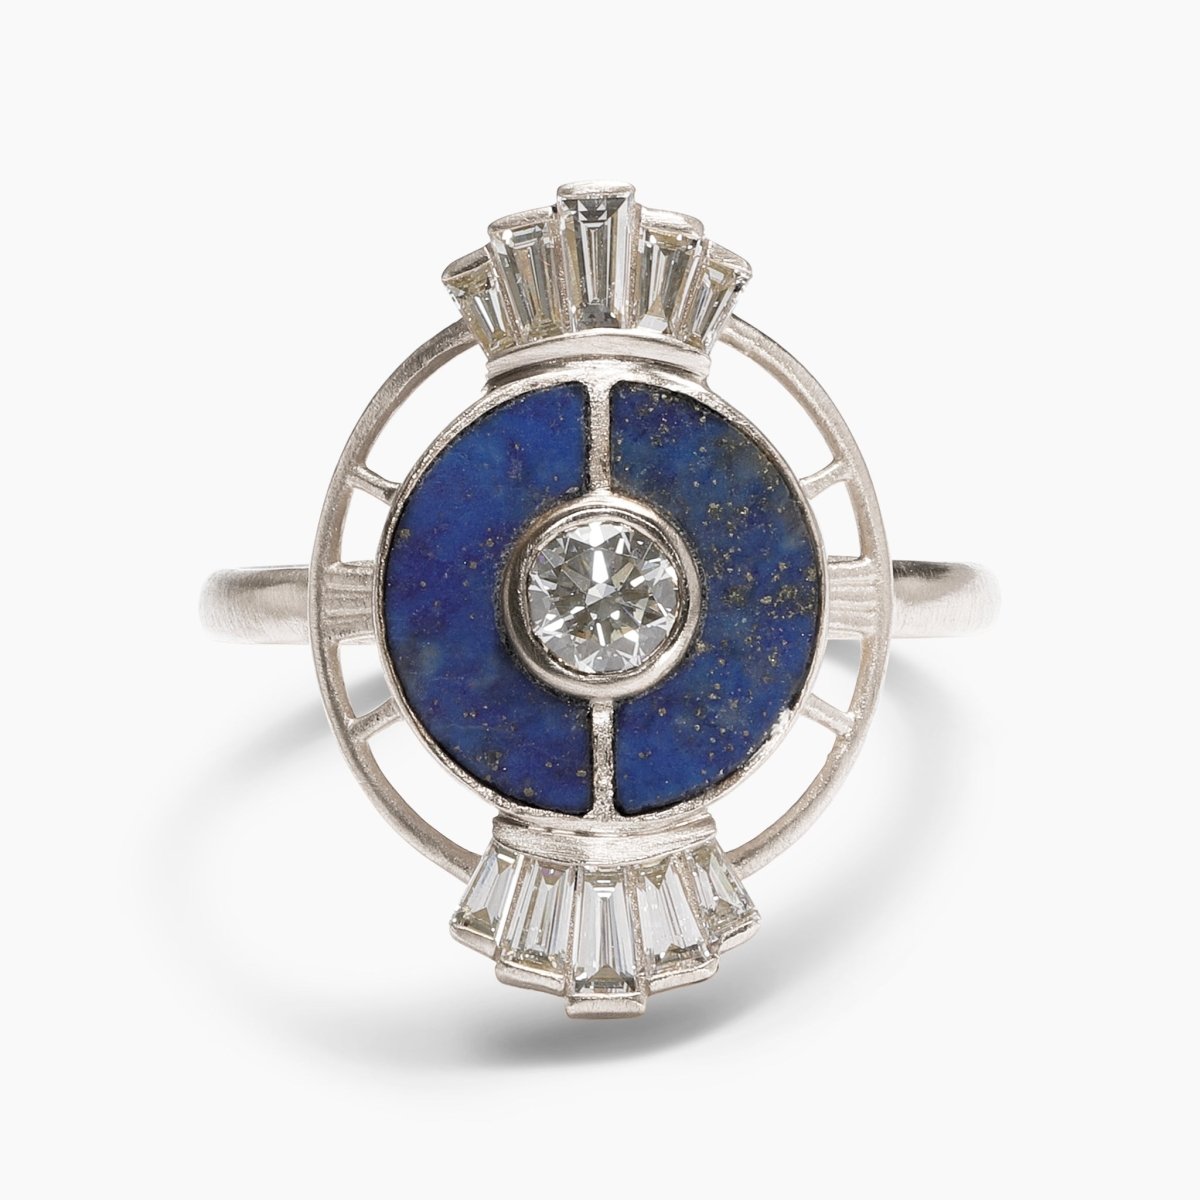 Ara 14K recycled white gold ring, with lab-grown diamonds and chilean lapis inlay. Designed and handcrafted in Portland, Oregon